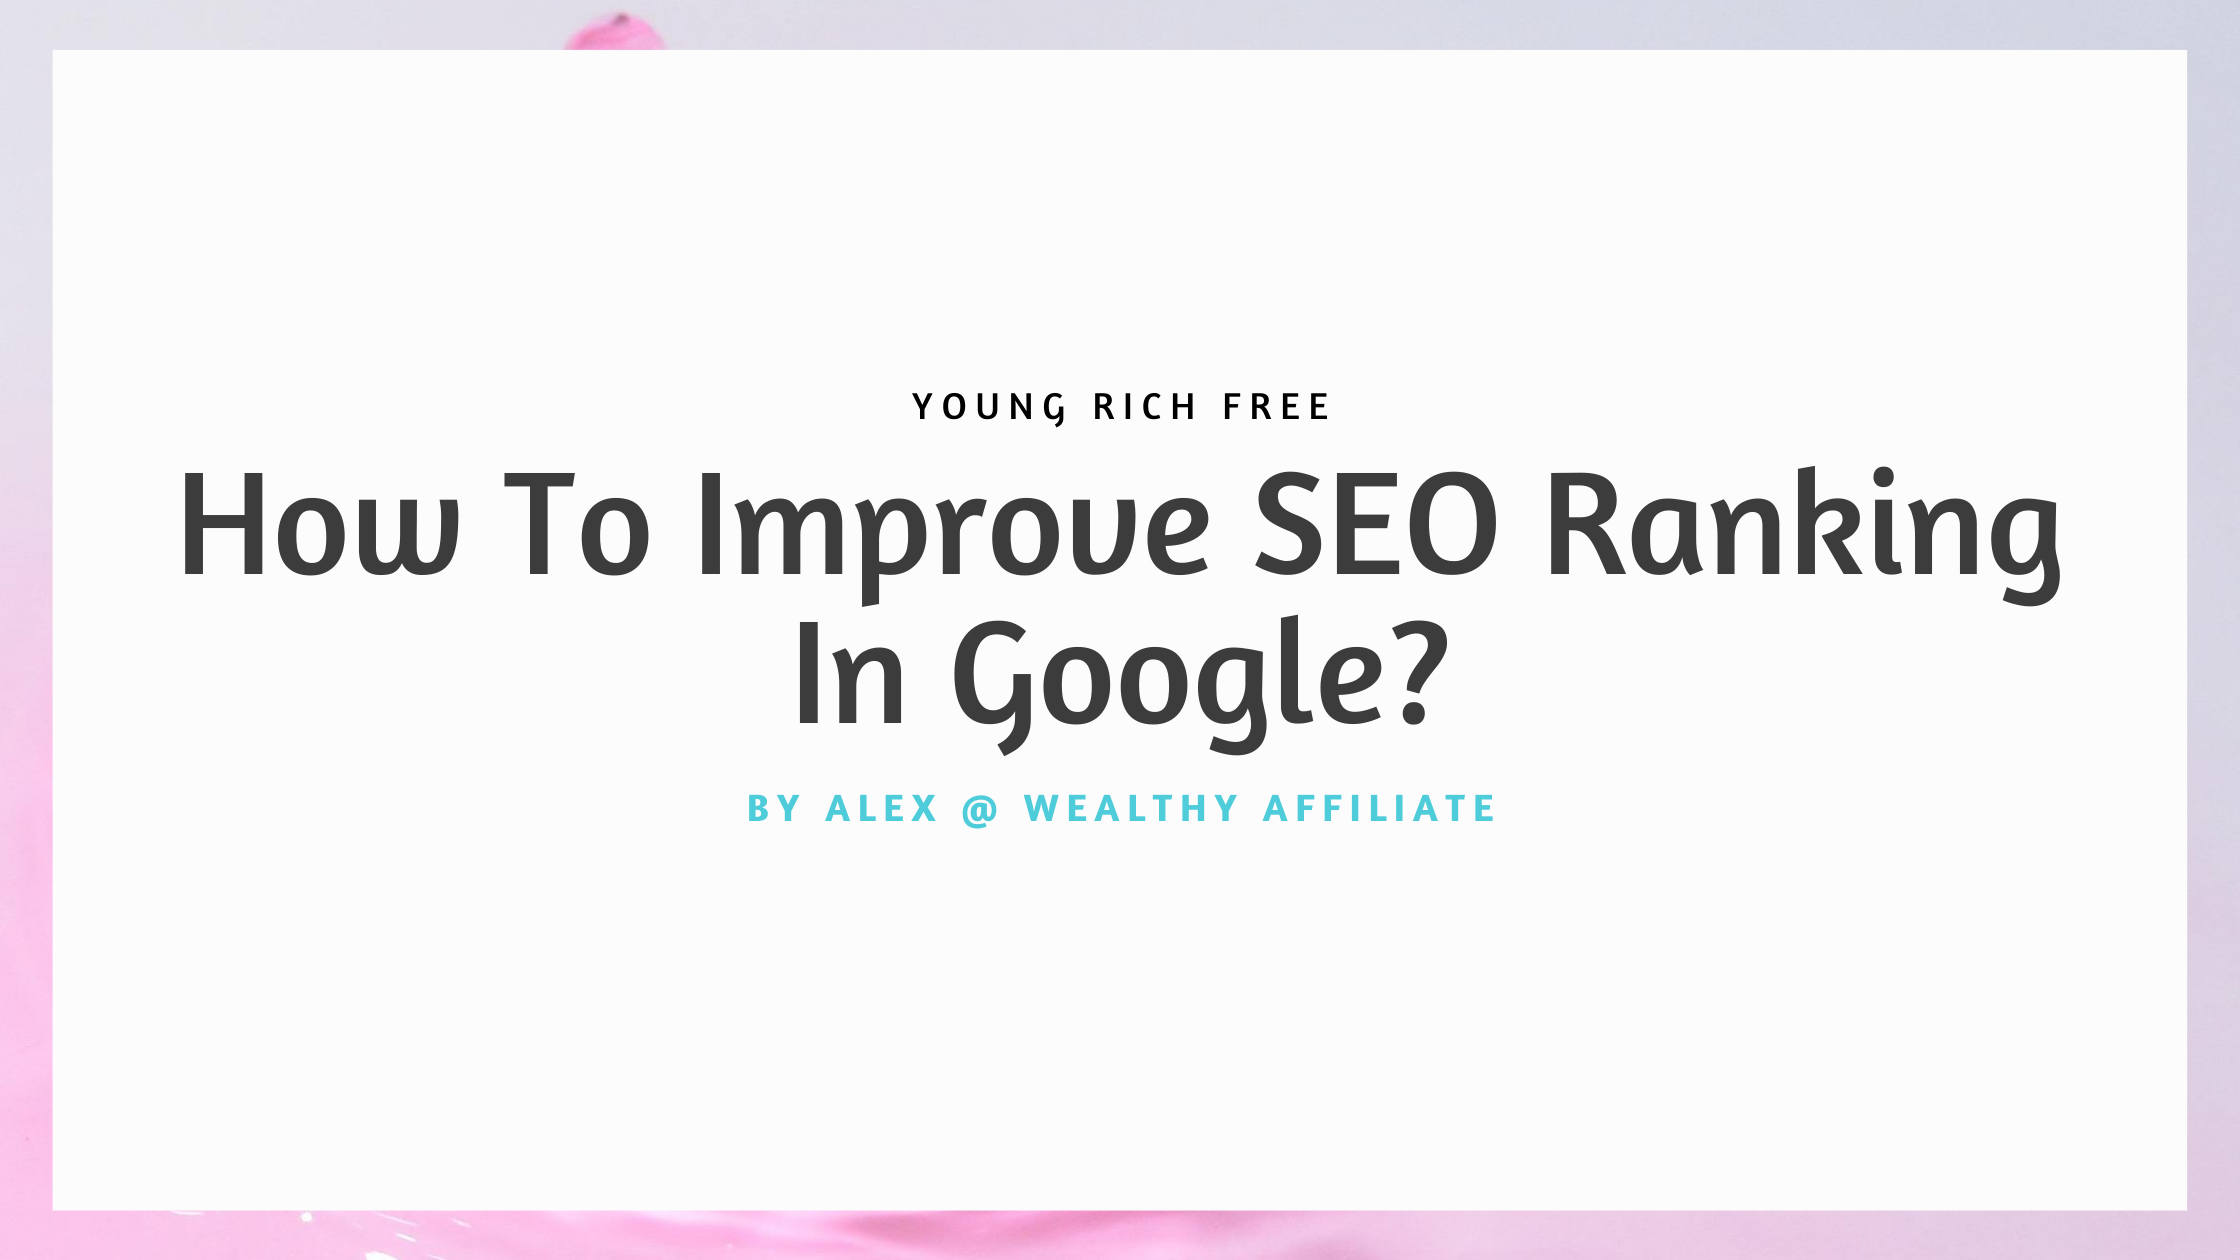 How To Improve SEO Ranking In Google